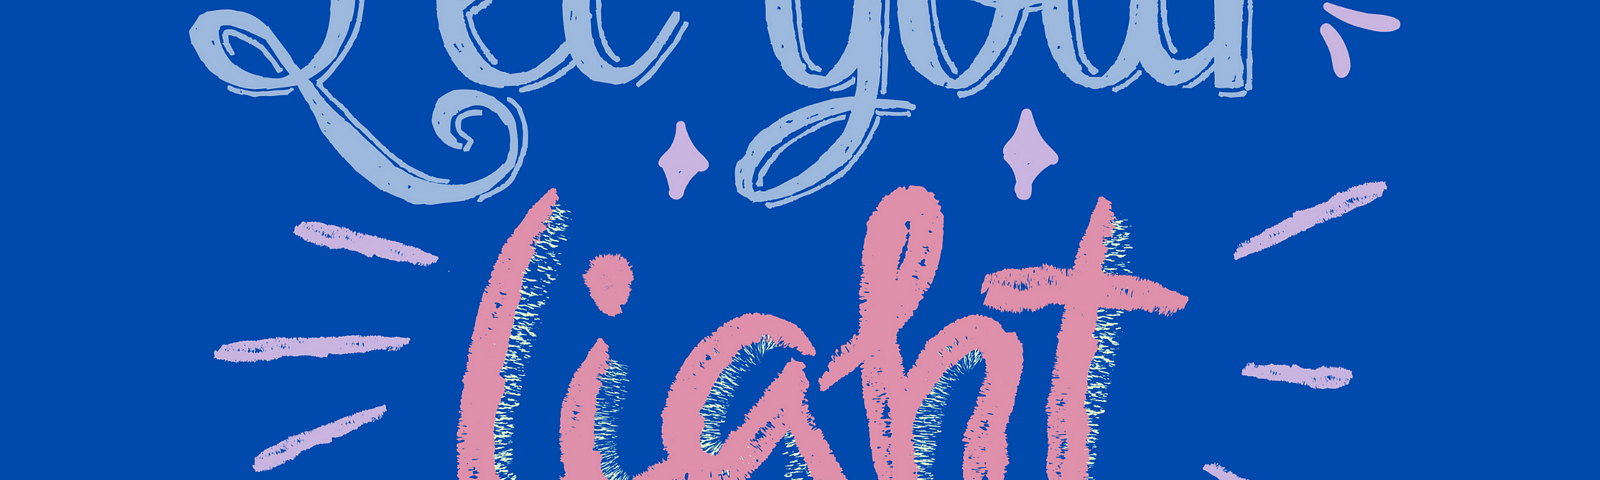 dark blue background with calligraphy lettering “Let your light shine.”